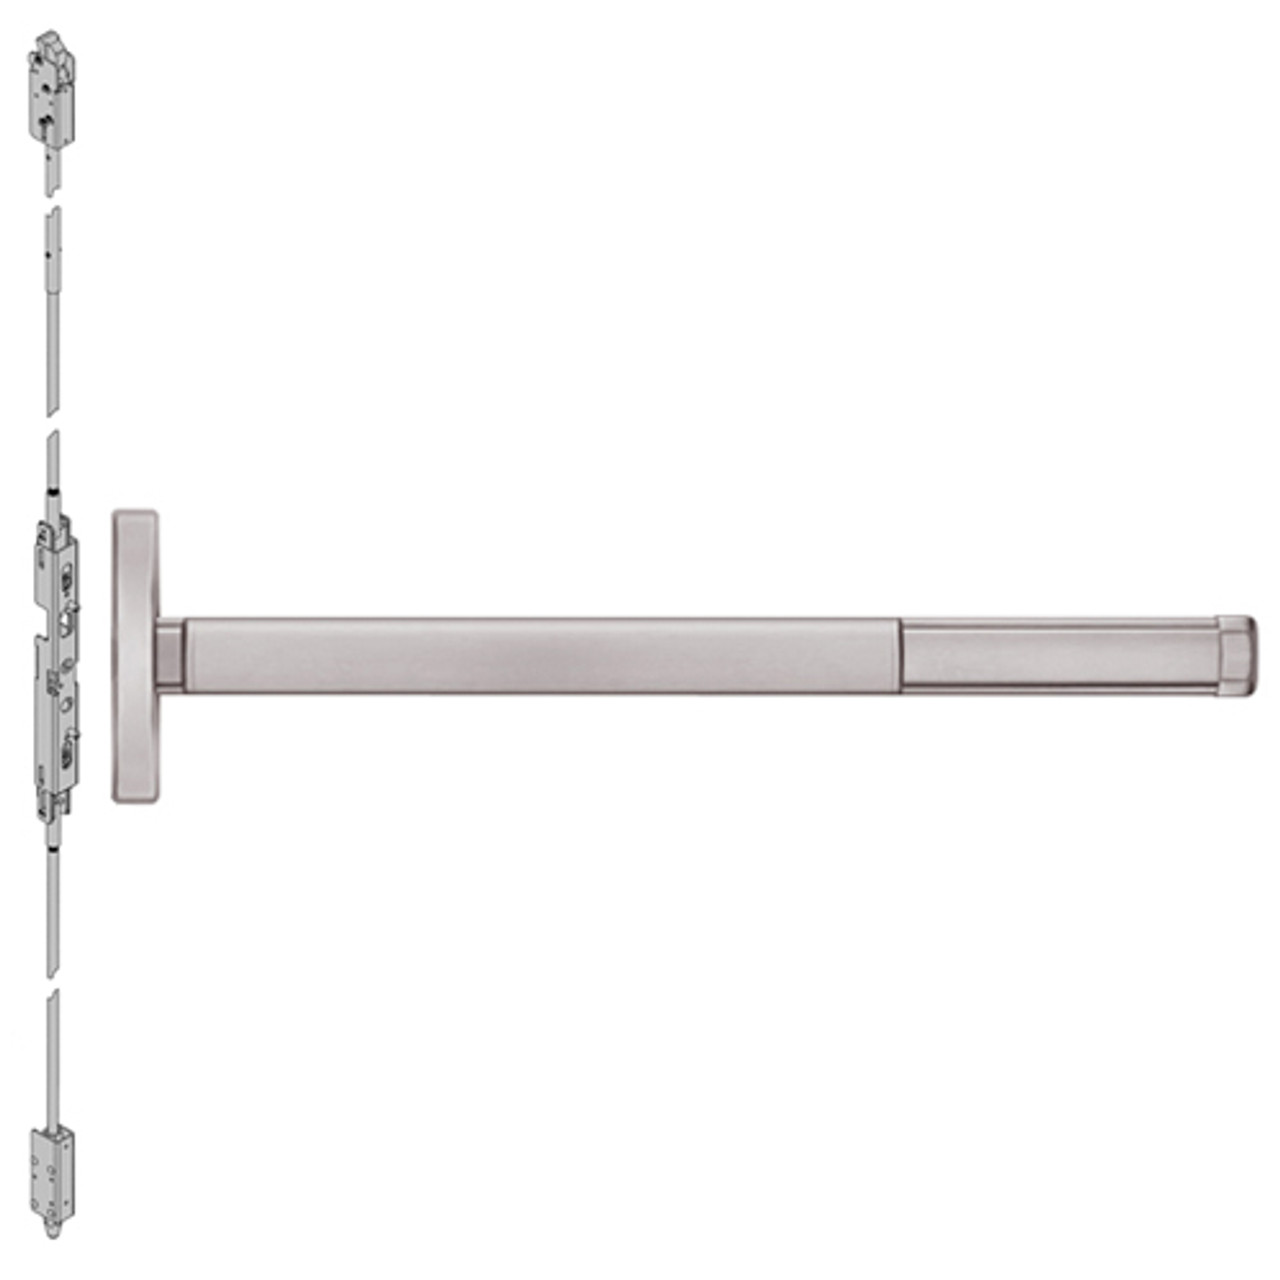 TS2614-628-48 PHI 2600 Series Concealed Vertical Rod Exit Device with Touchbar Monitoring Switch Prepped for Lever Always Active in Satin Aluminum Finish